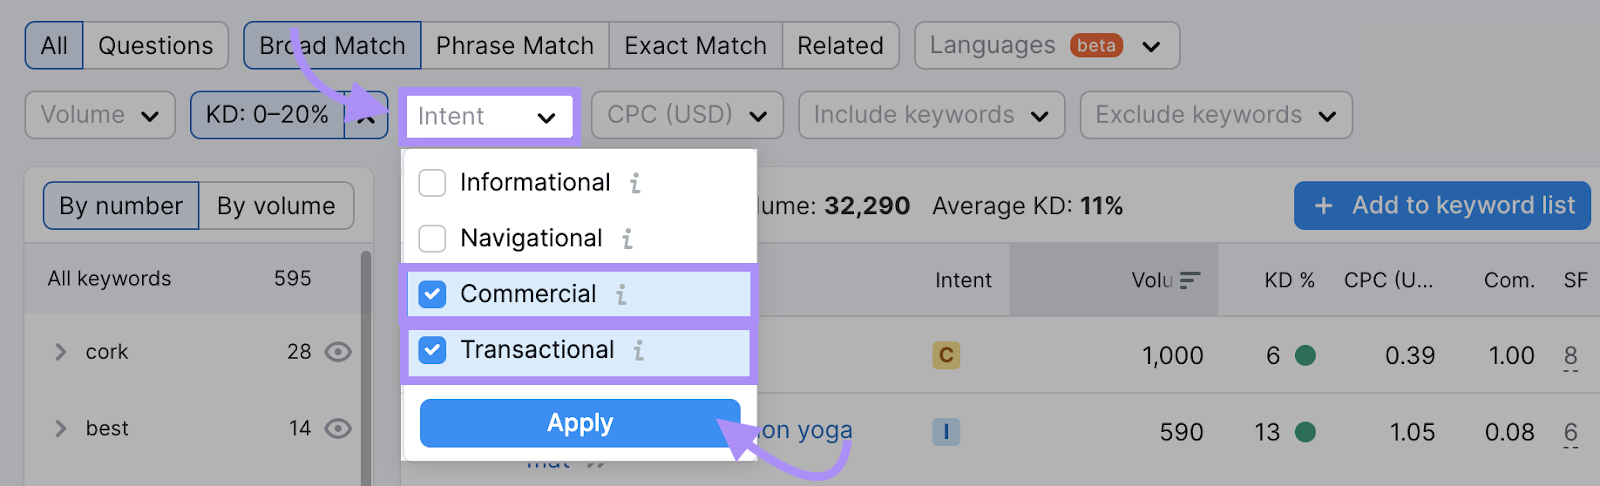 “Commercial” and “Transactional” boxes selected from the “Intent” filter drop-down menu